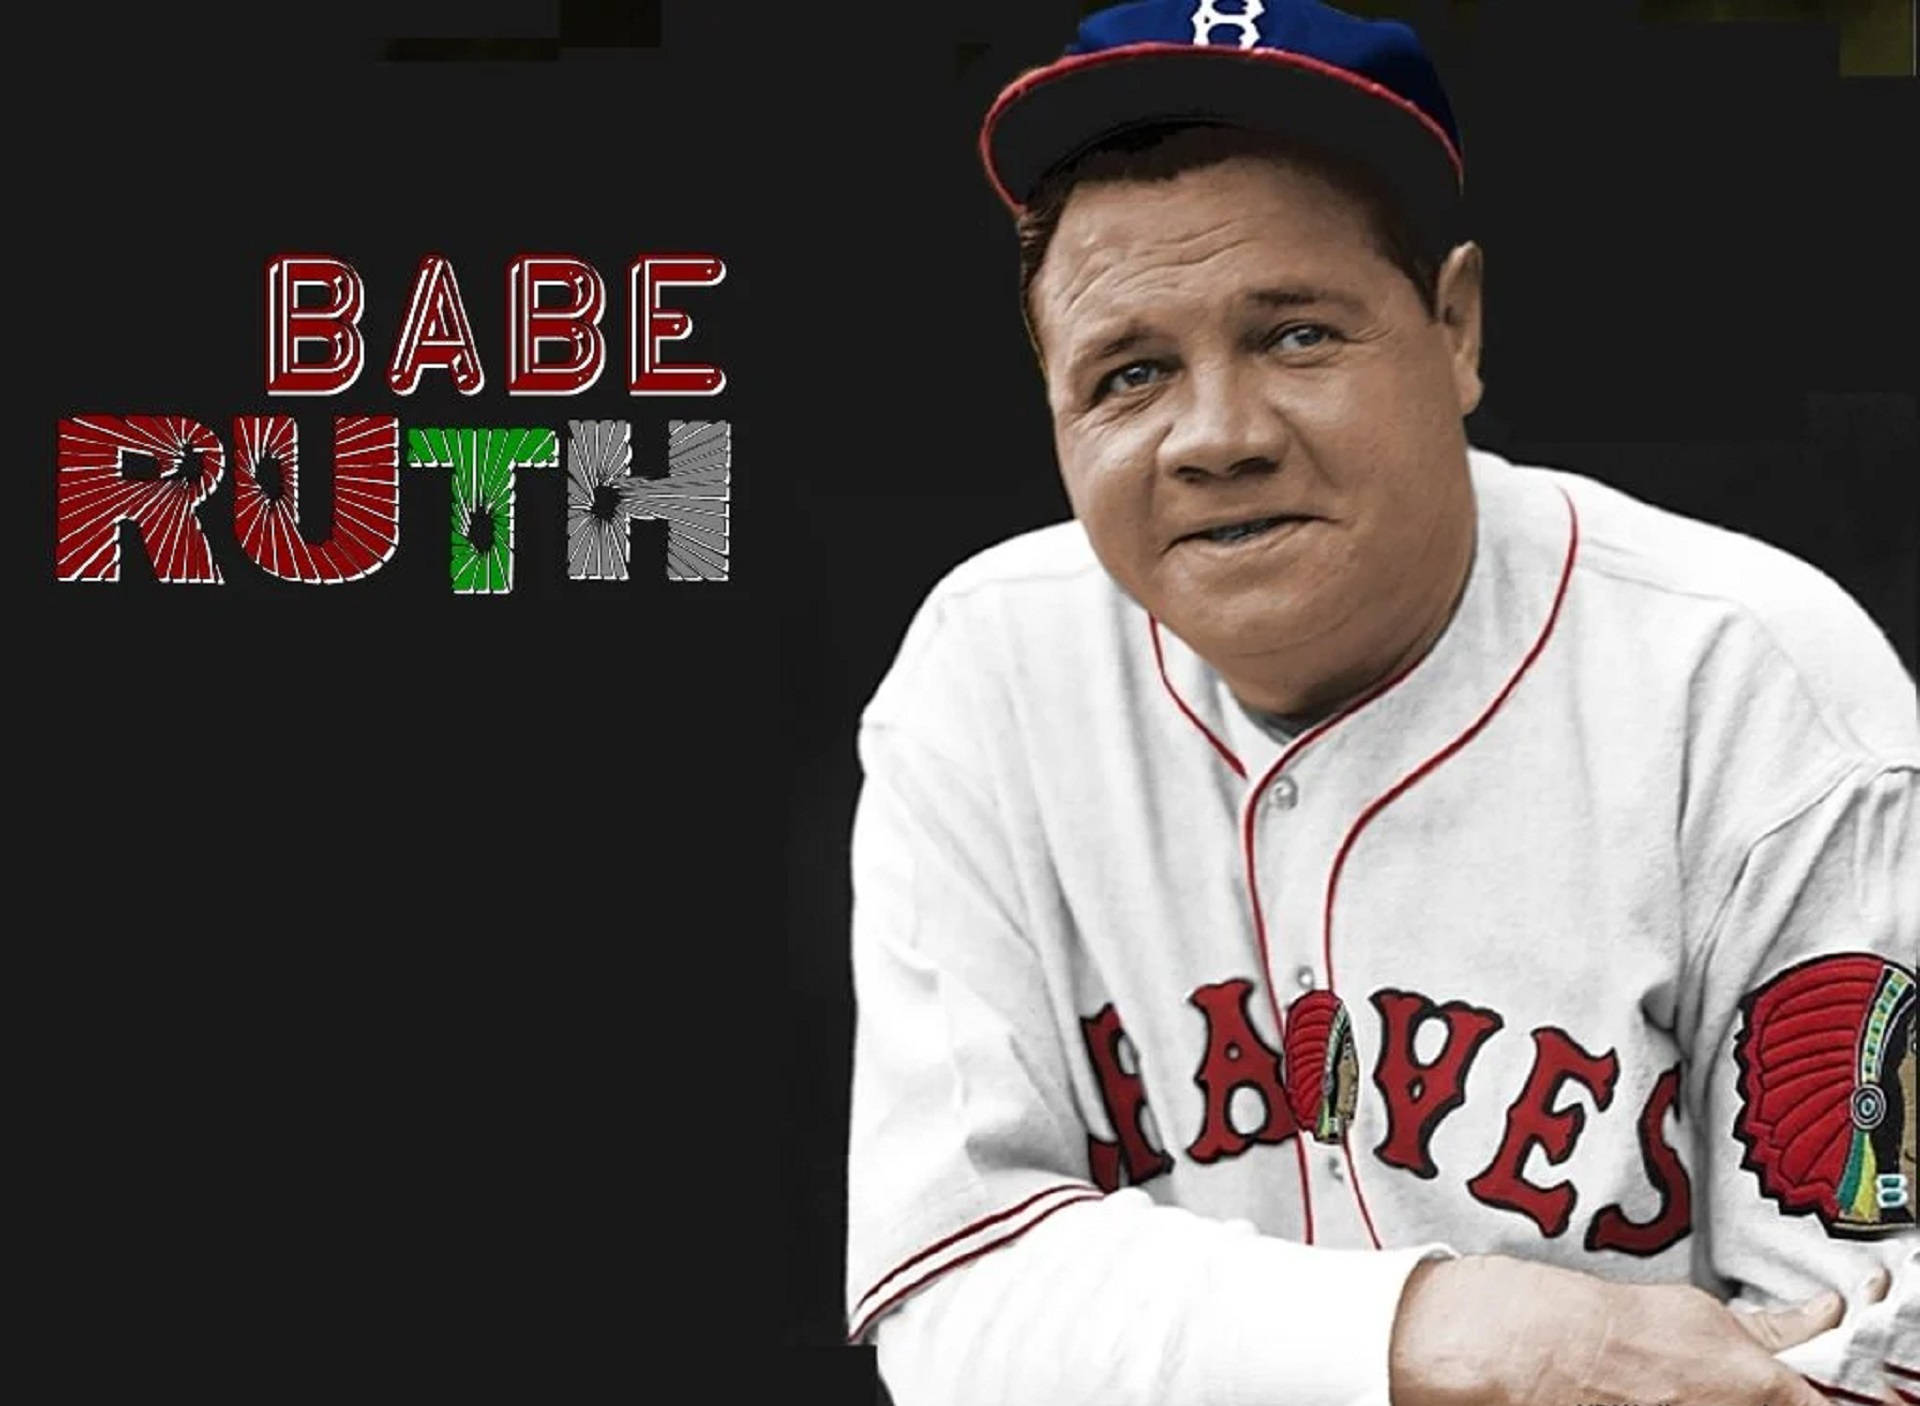 Babe Ruth Poster In Black Wallpaper